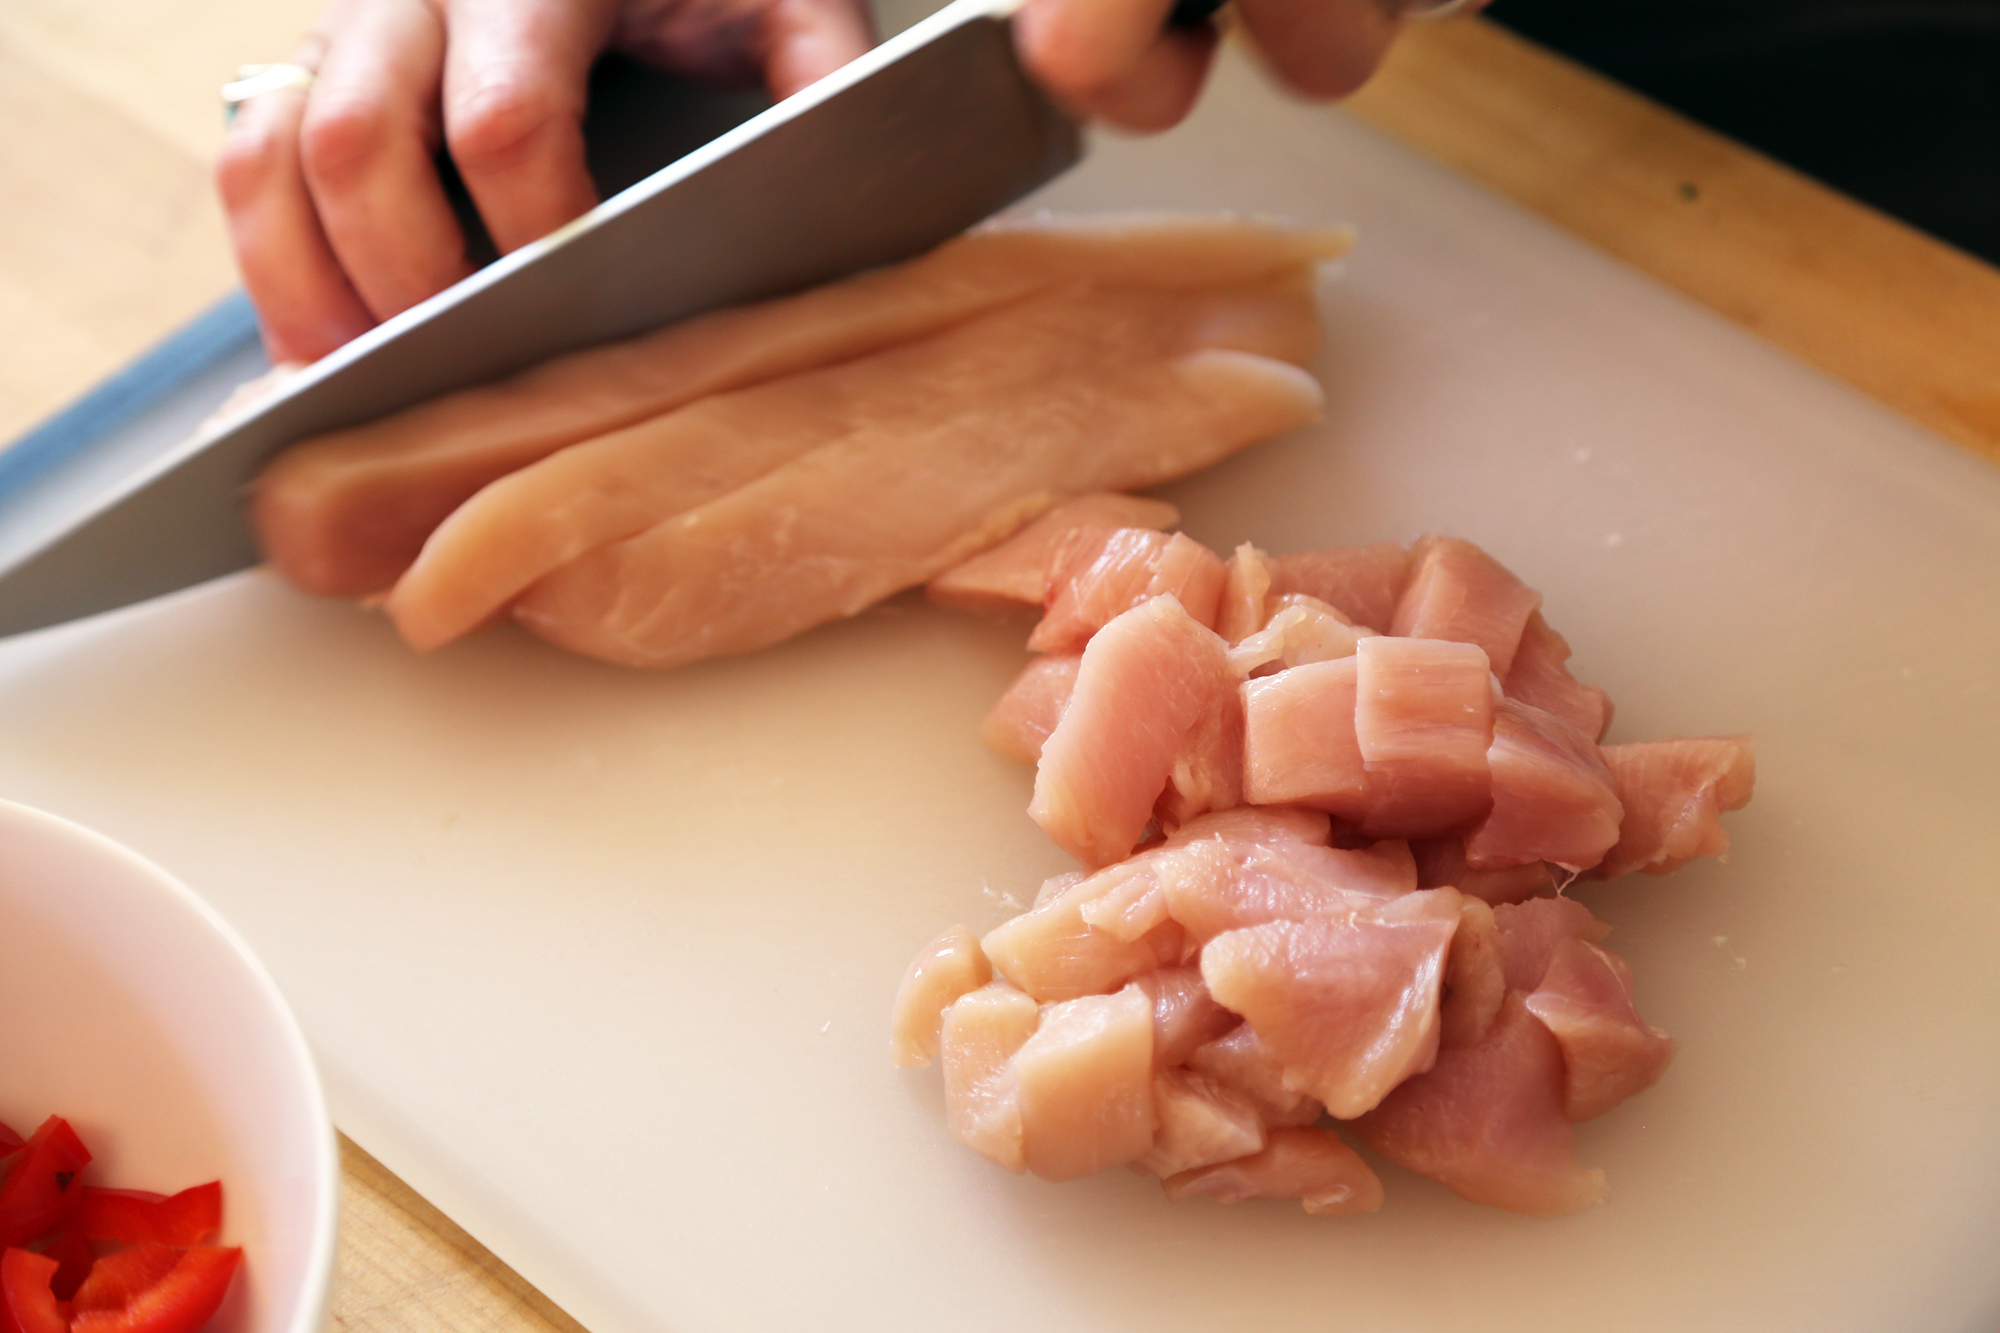 Boneless, skinless chicken thigh or breast, thinly sliced or cubed.